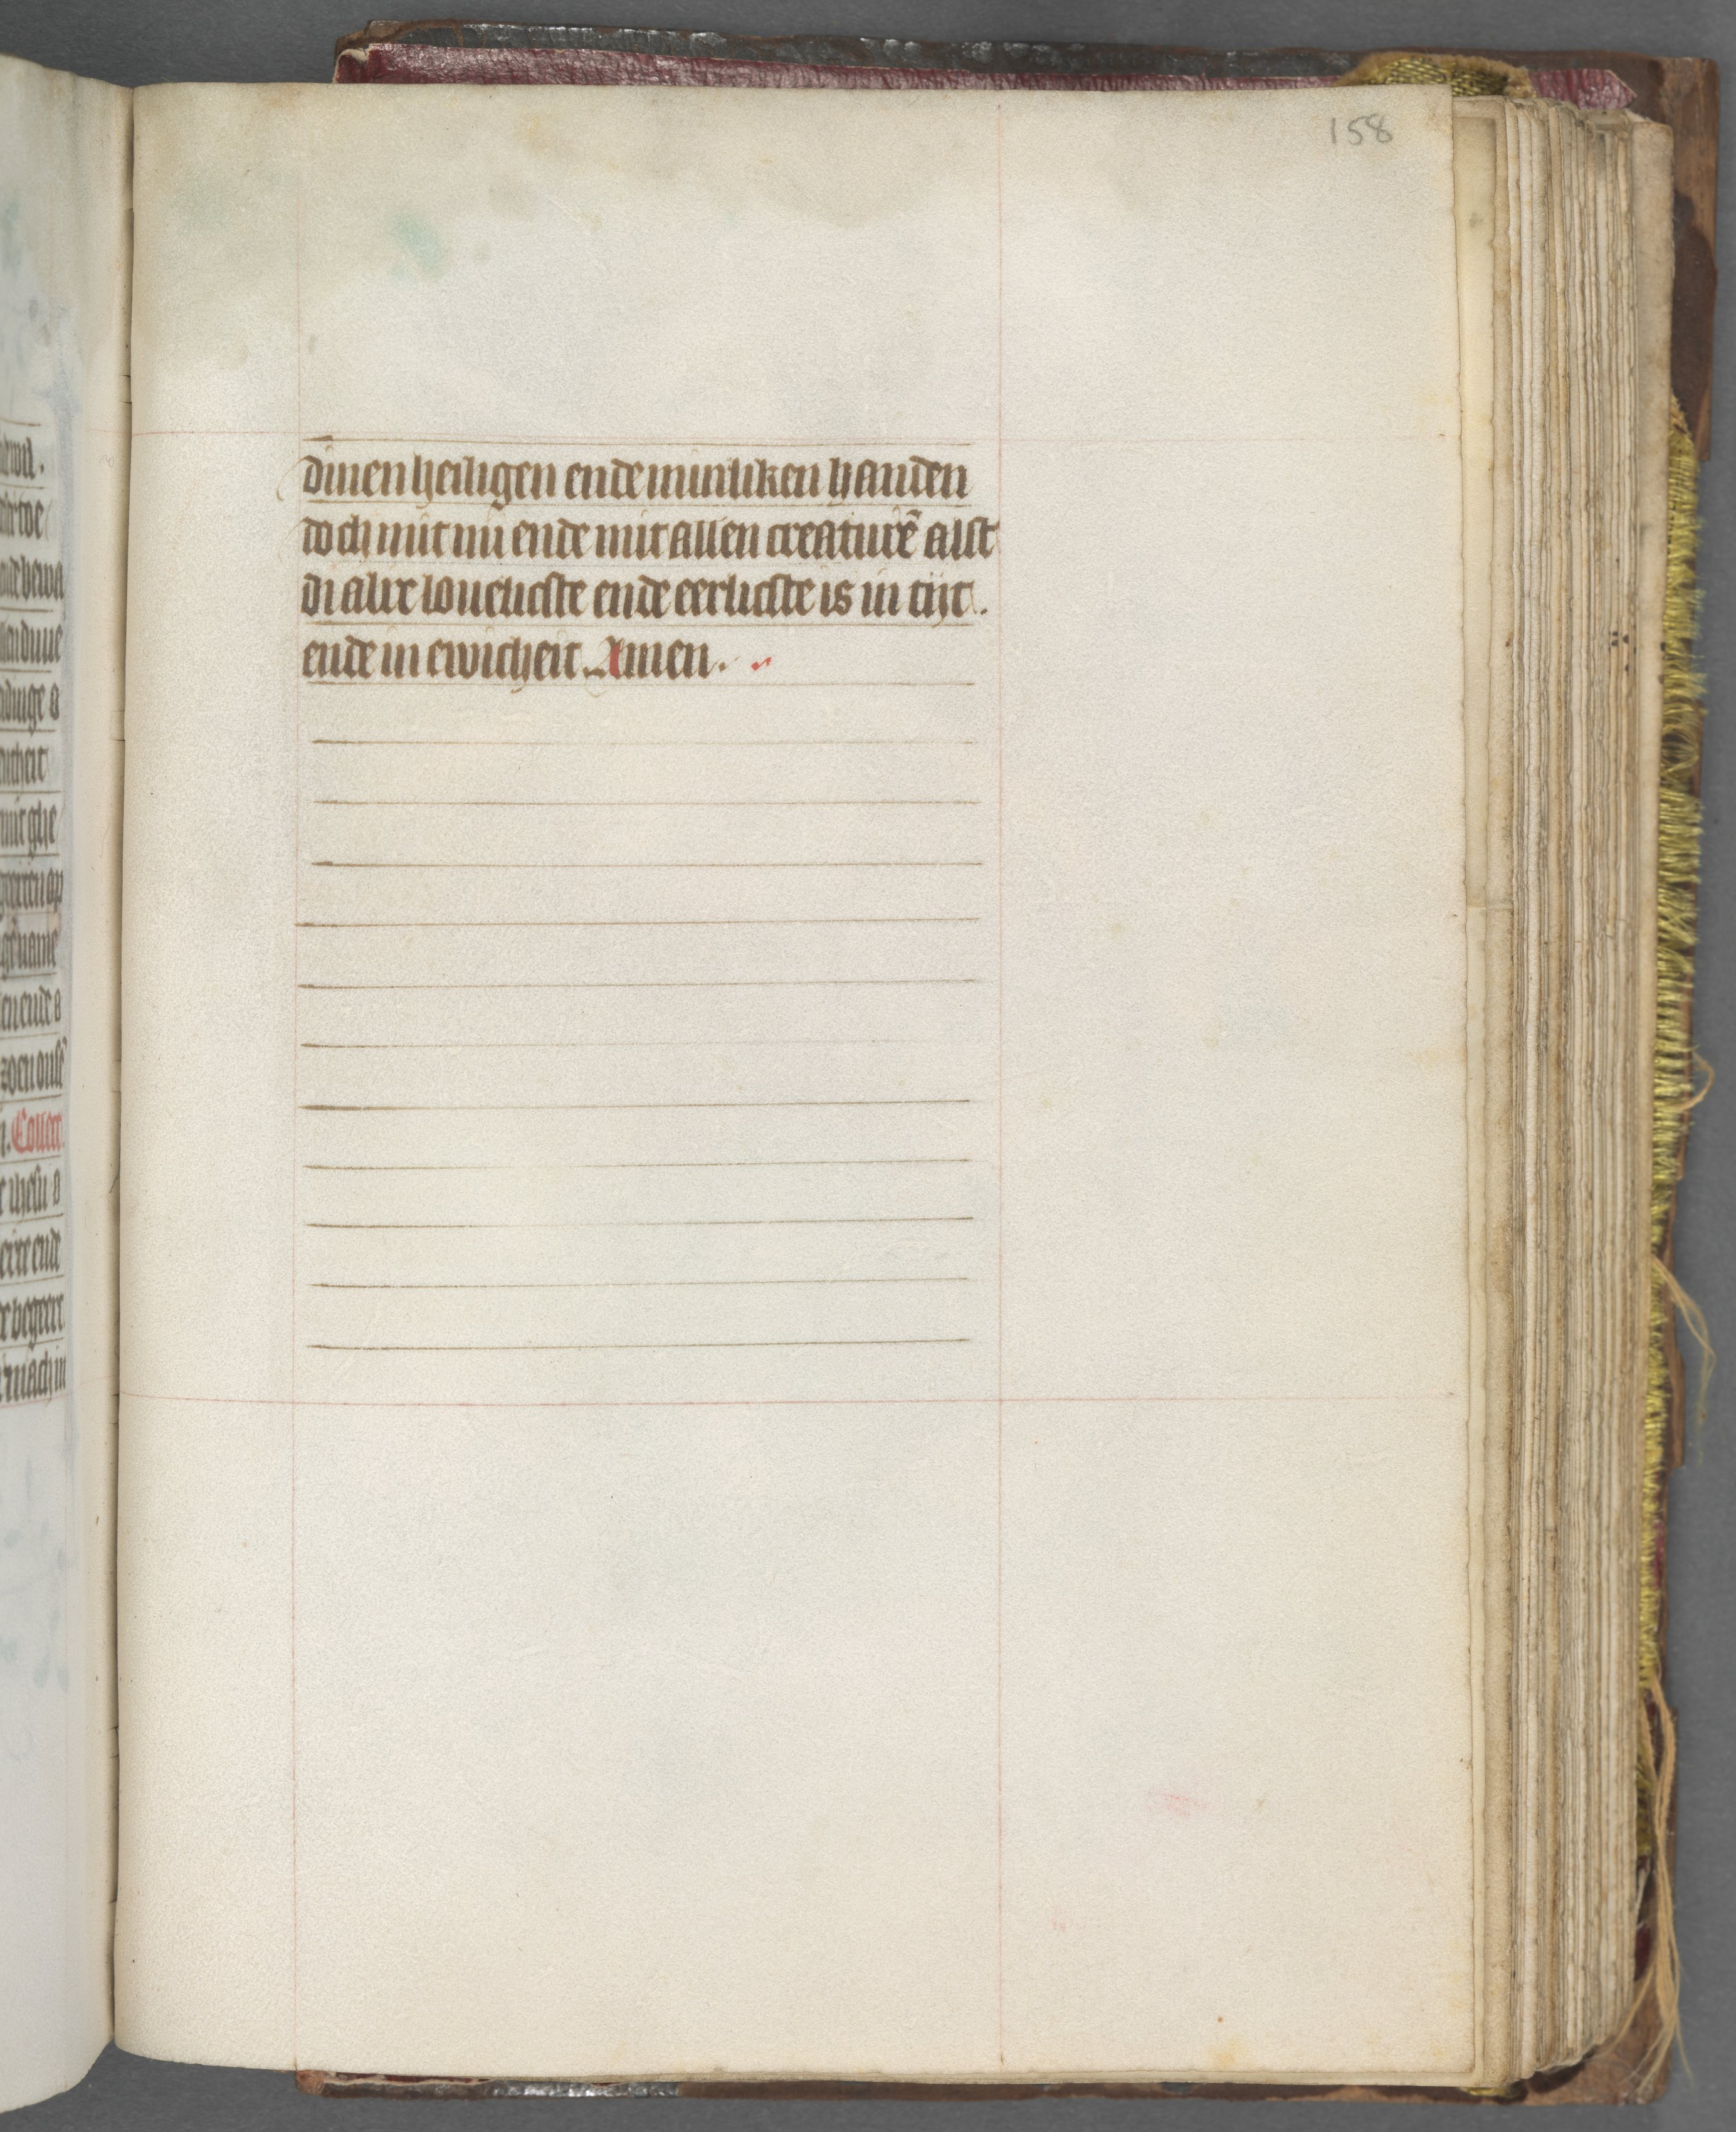 Book of Hours (Use of Utrecht): fol. 158r, Text